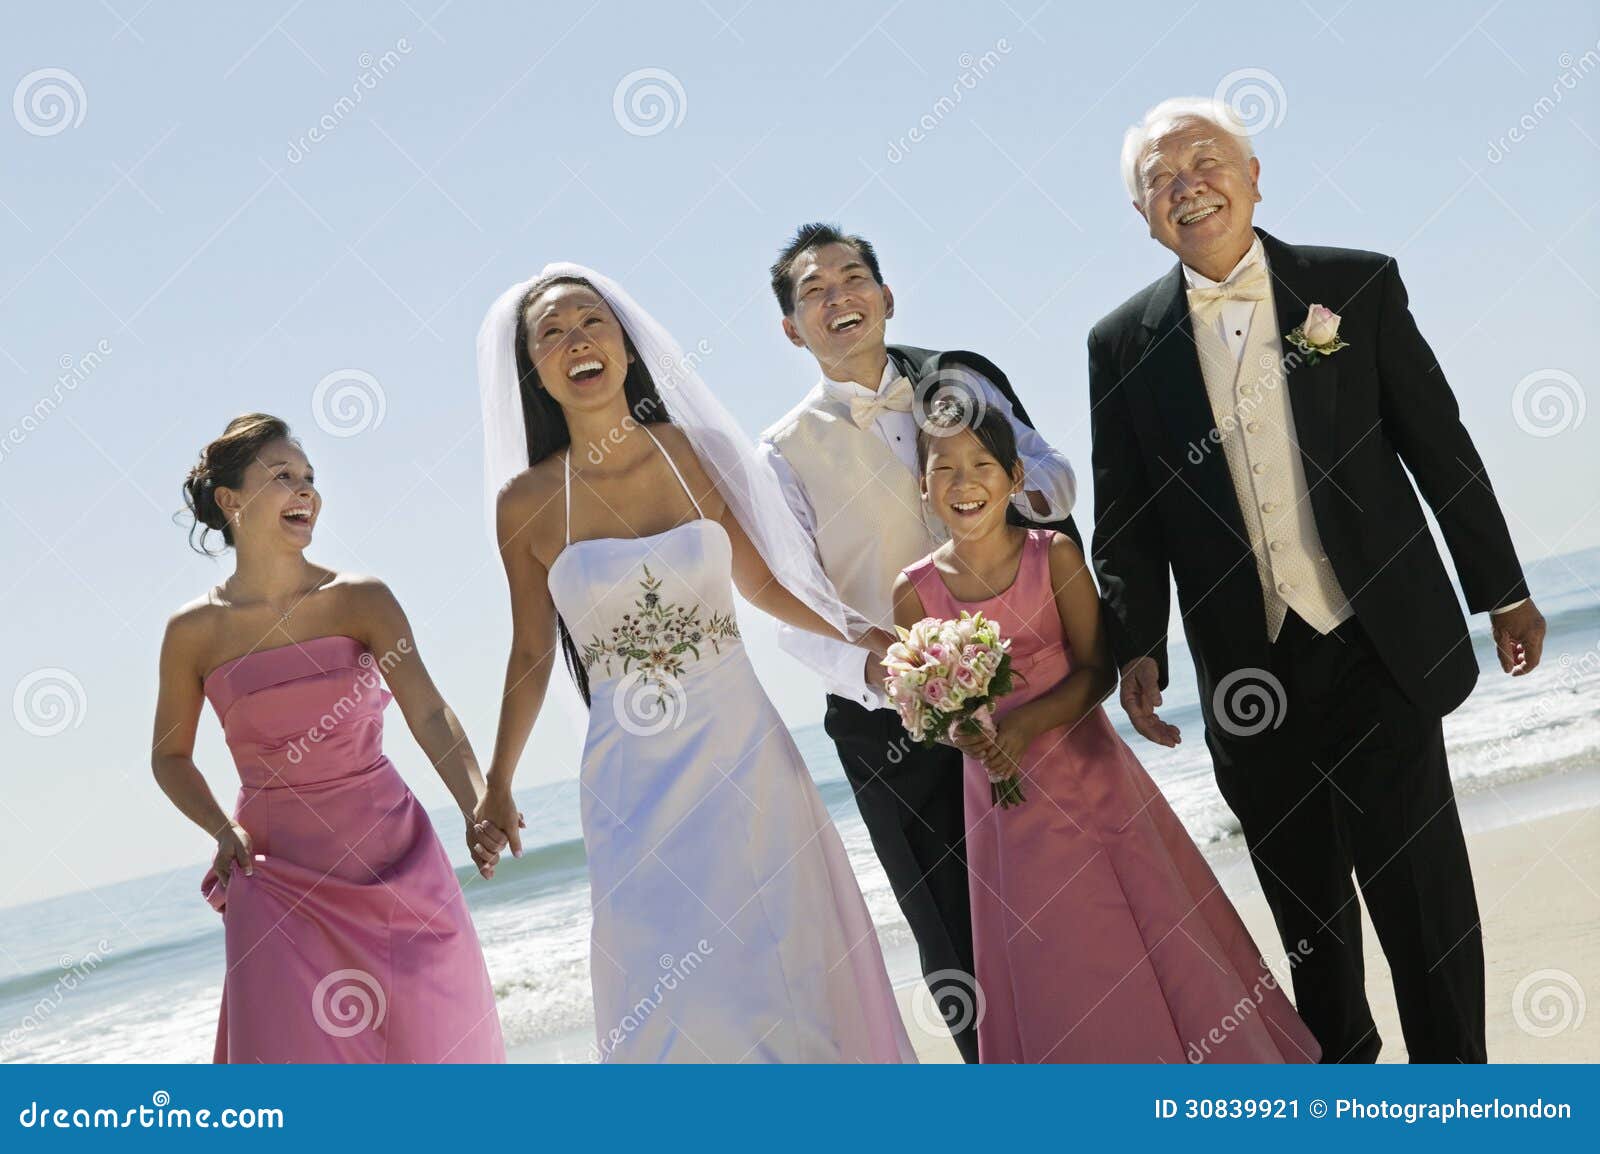 Bride And Groom With Family On Beach (portrait) Stock